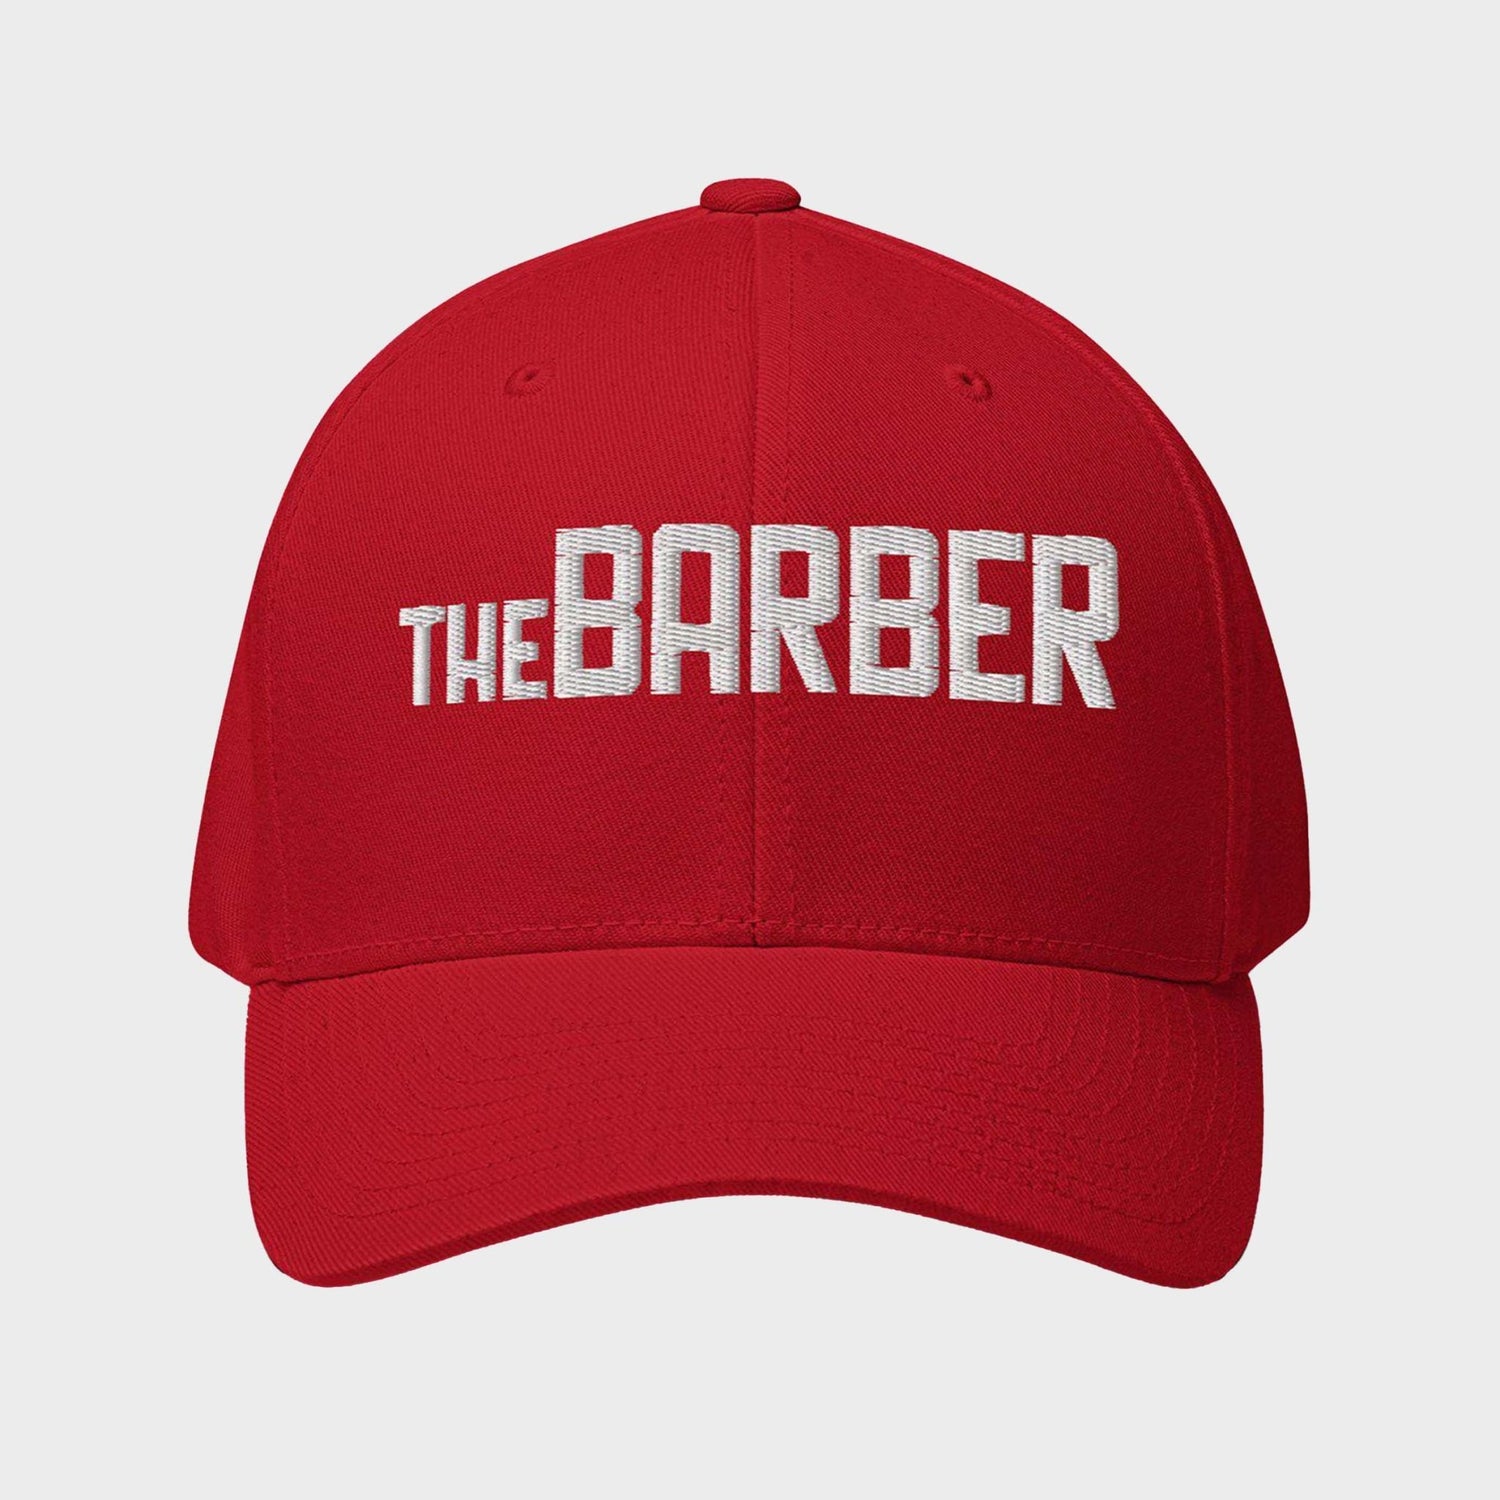 Cap Red/White - The Barber Style